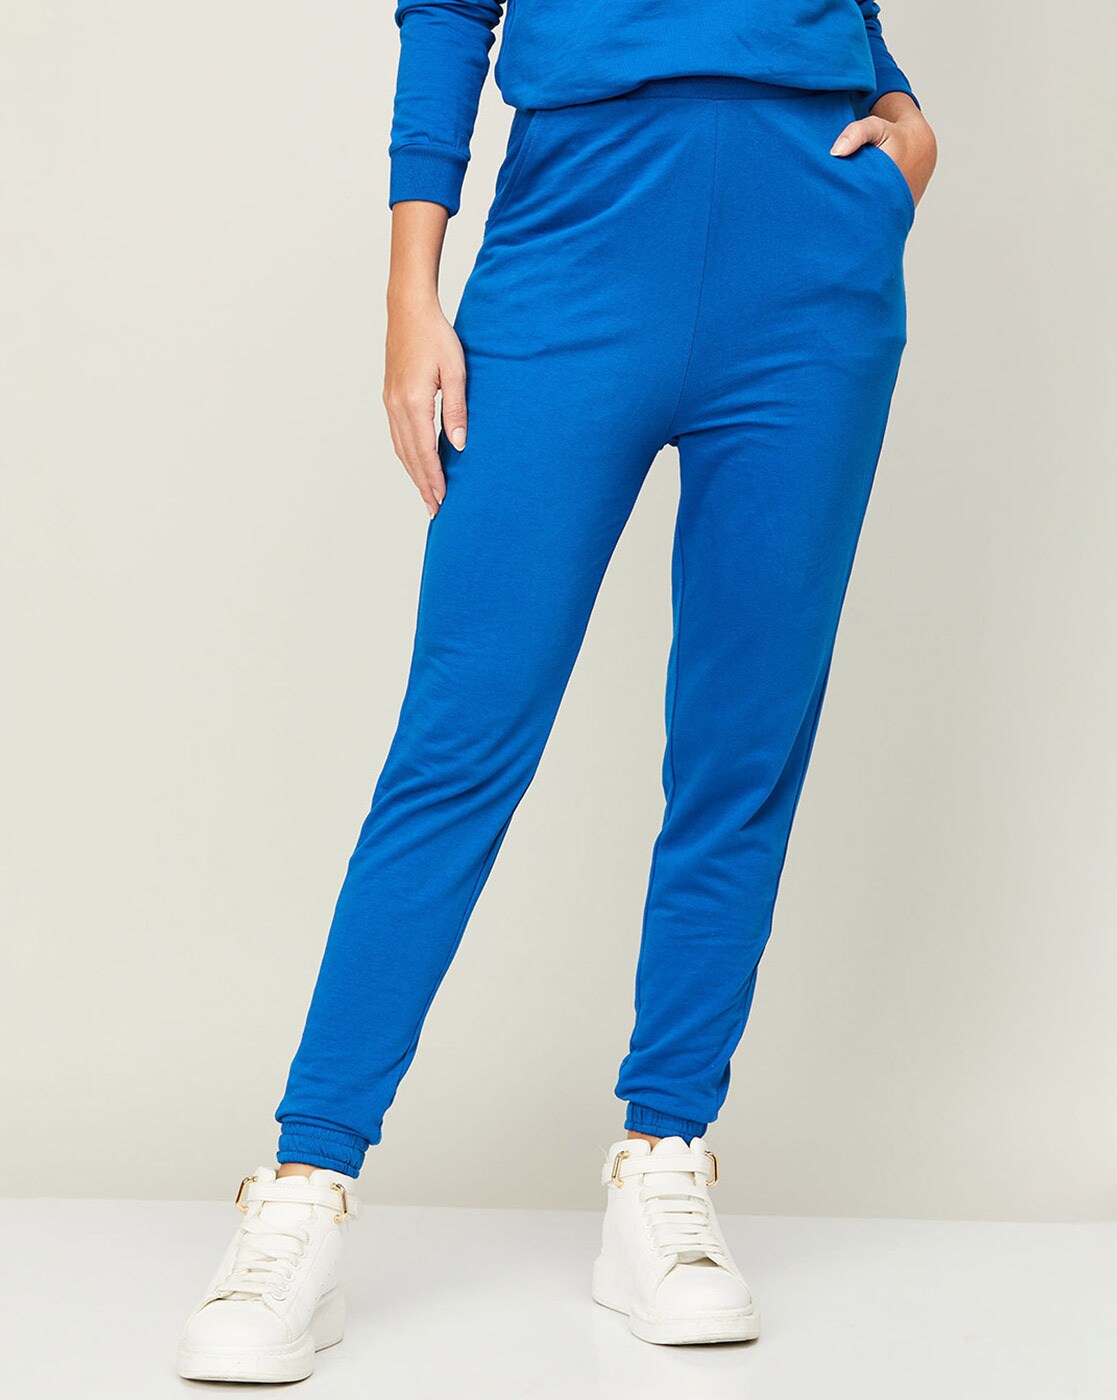 Buy Blue Trousers & Pants for Women by Ginger by lifestyle Online